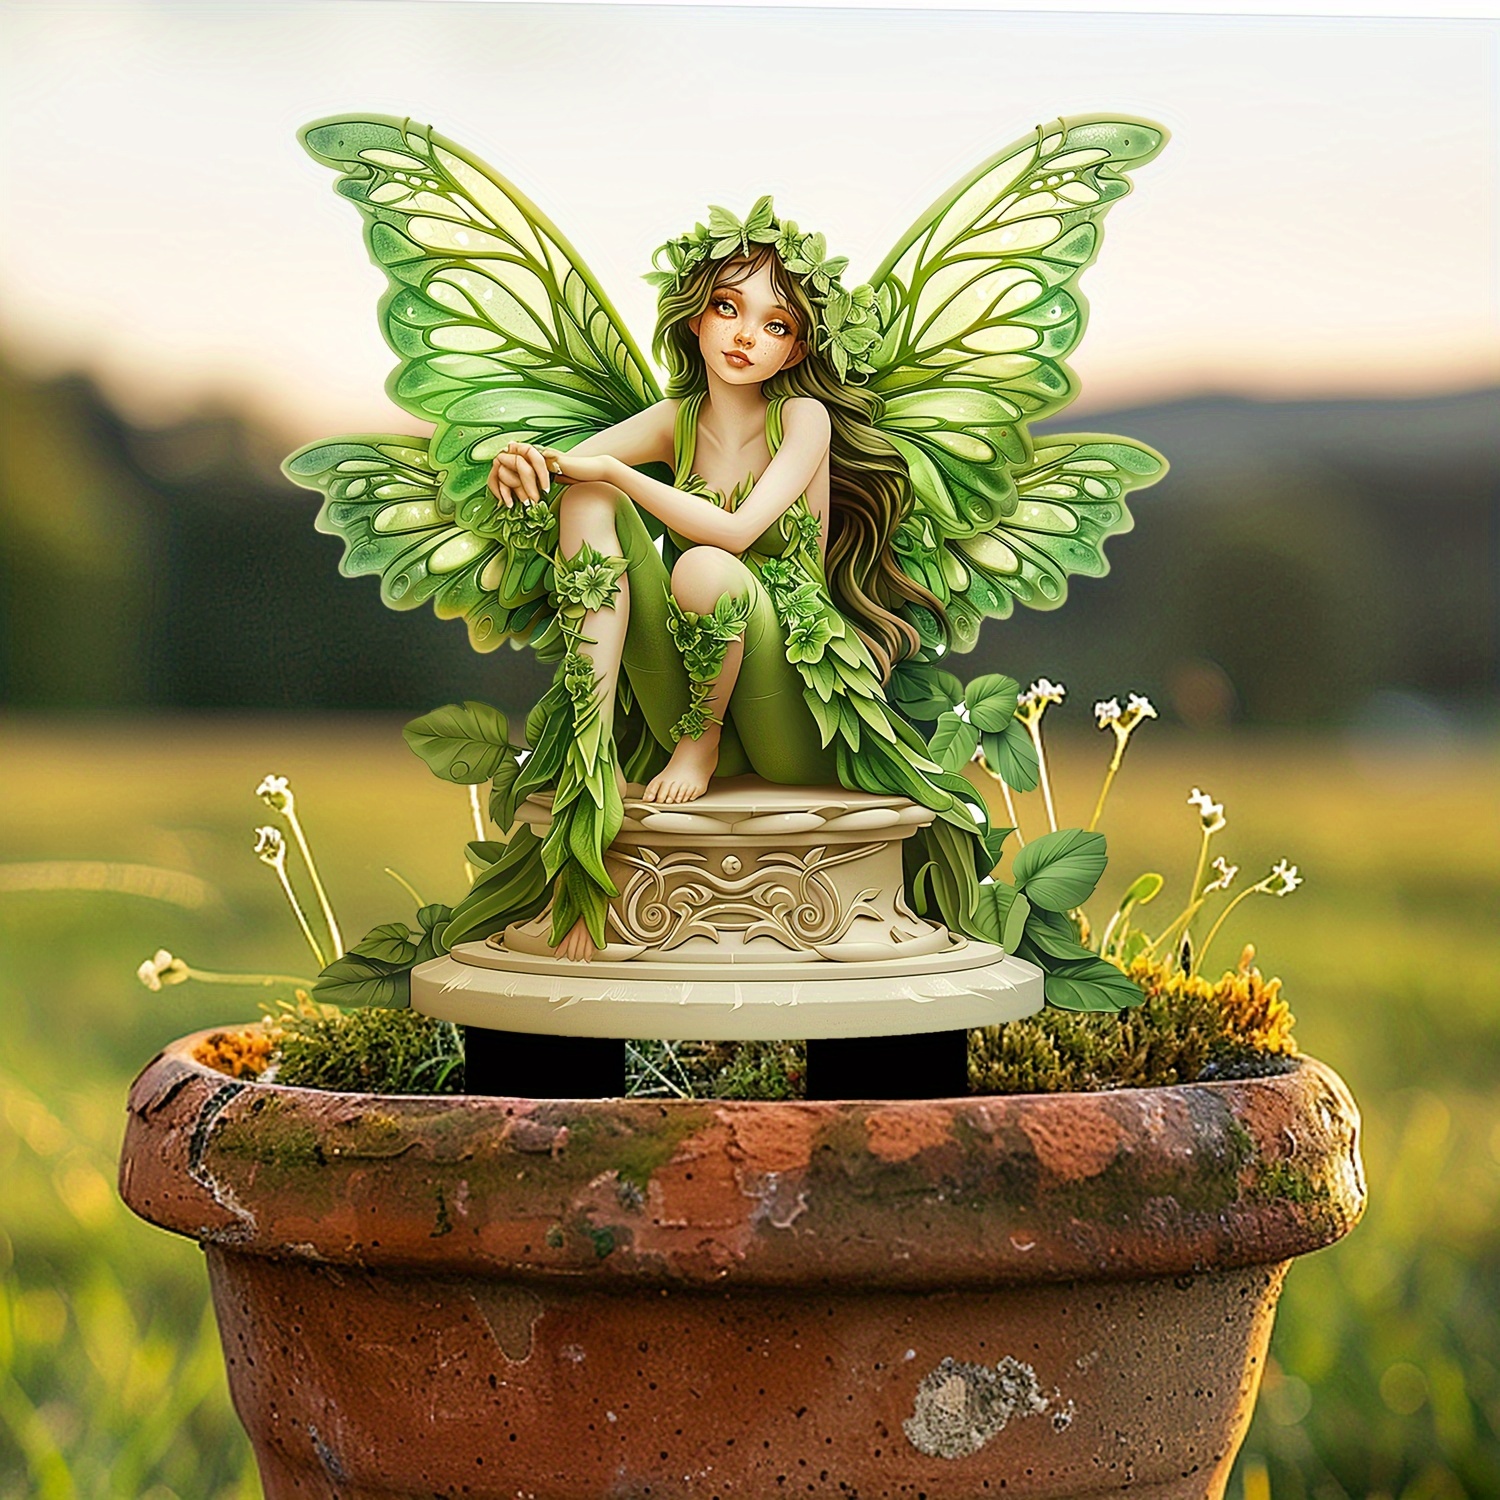 

Boho-style Acrylic Garden Fairy Decorative Stake, Waterproof Multipurpose Elves Theme Sign, English Language, Artistic Pot & Yard Accent With Green Elf Design, Outdoor Durable Decor Plaque (pack Of 1)